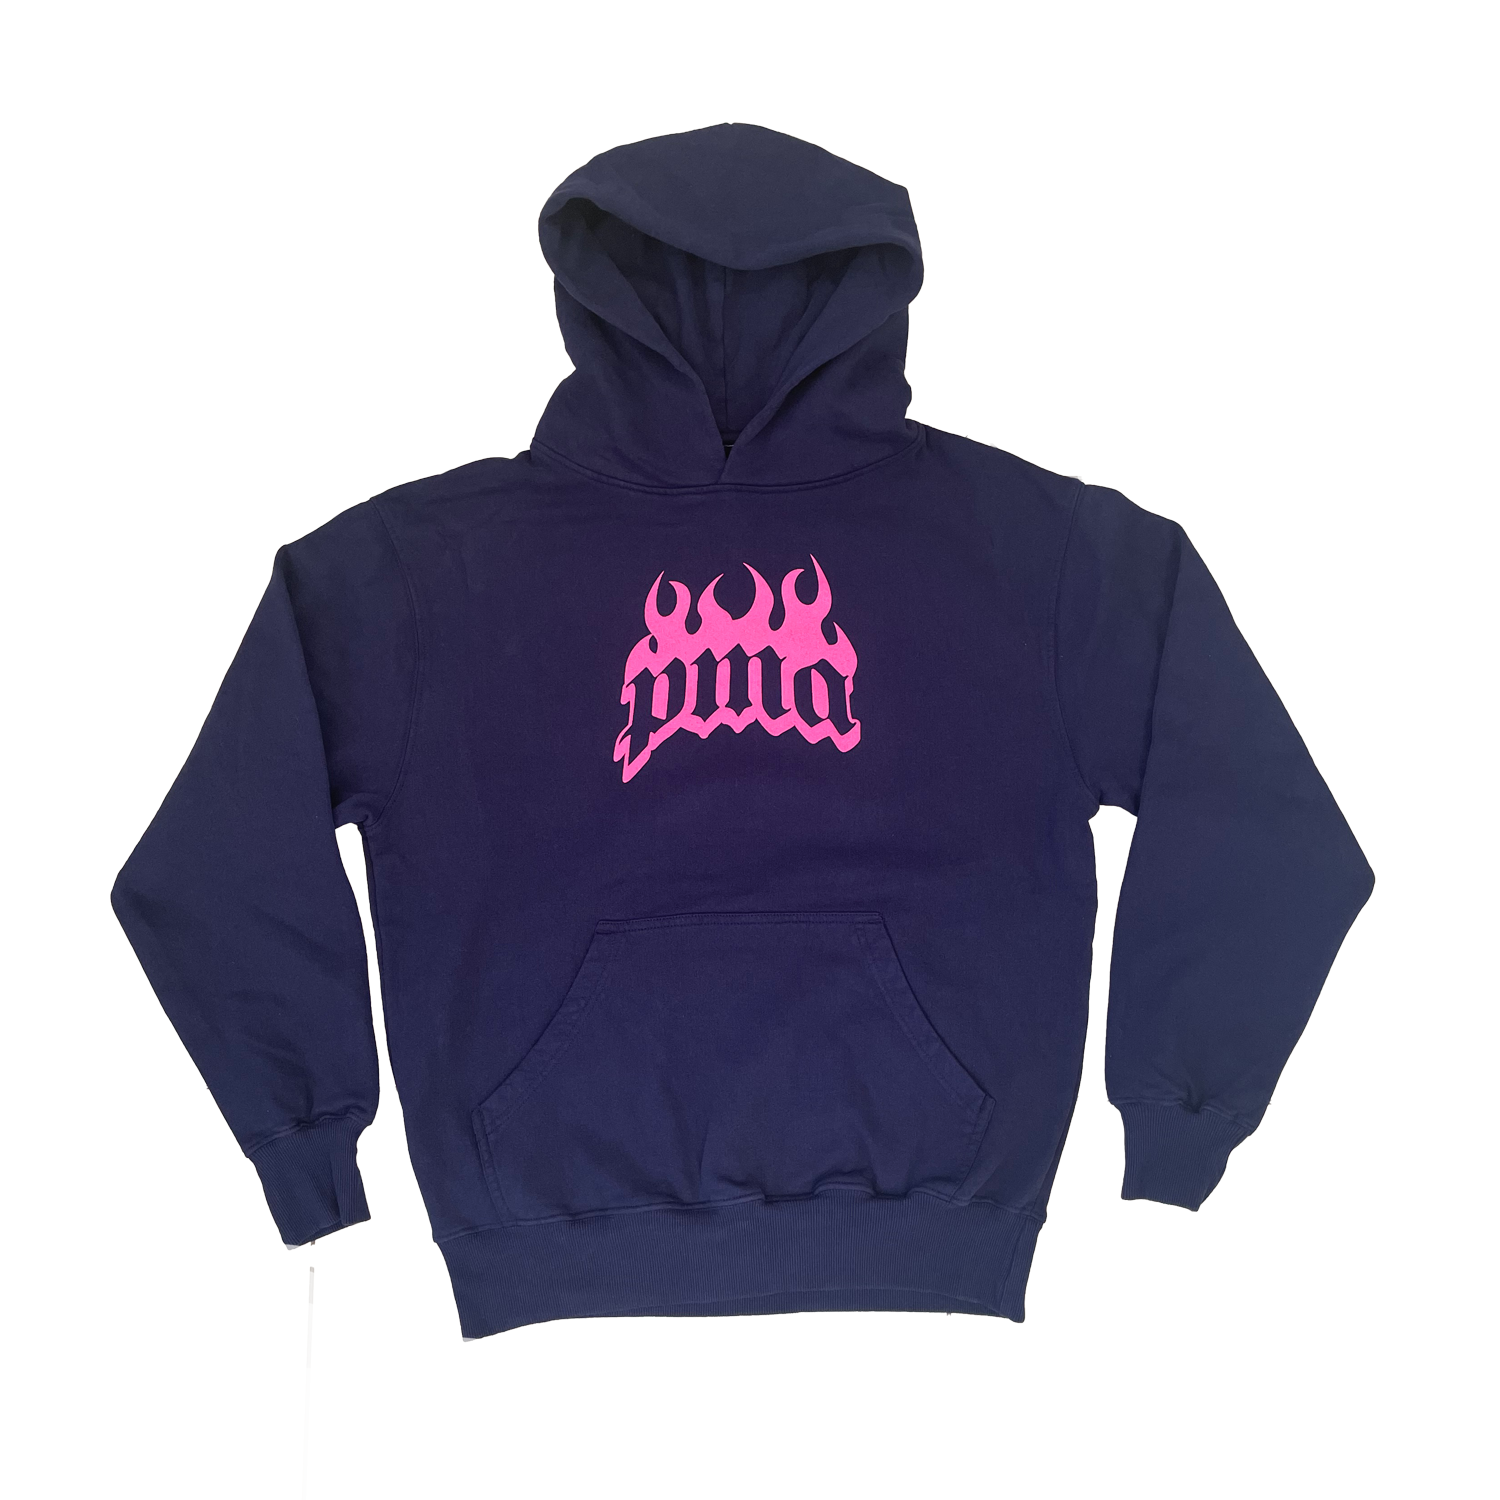 SPREAD THE MESSAGE HOODIE